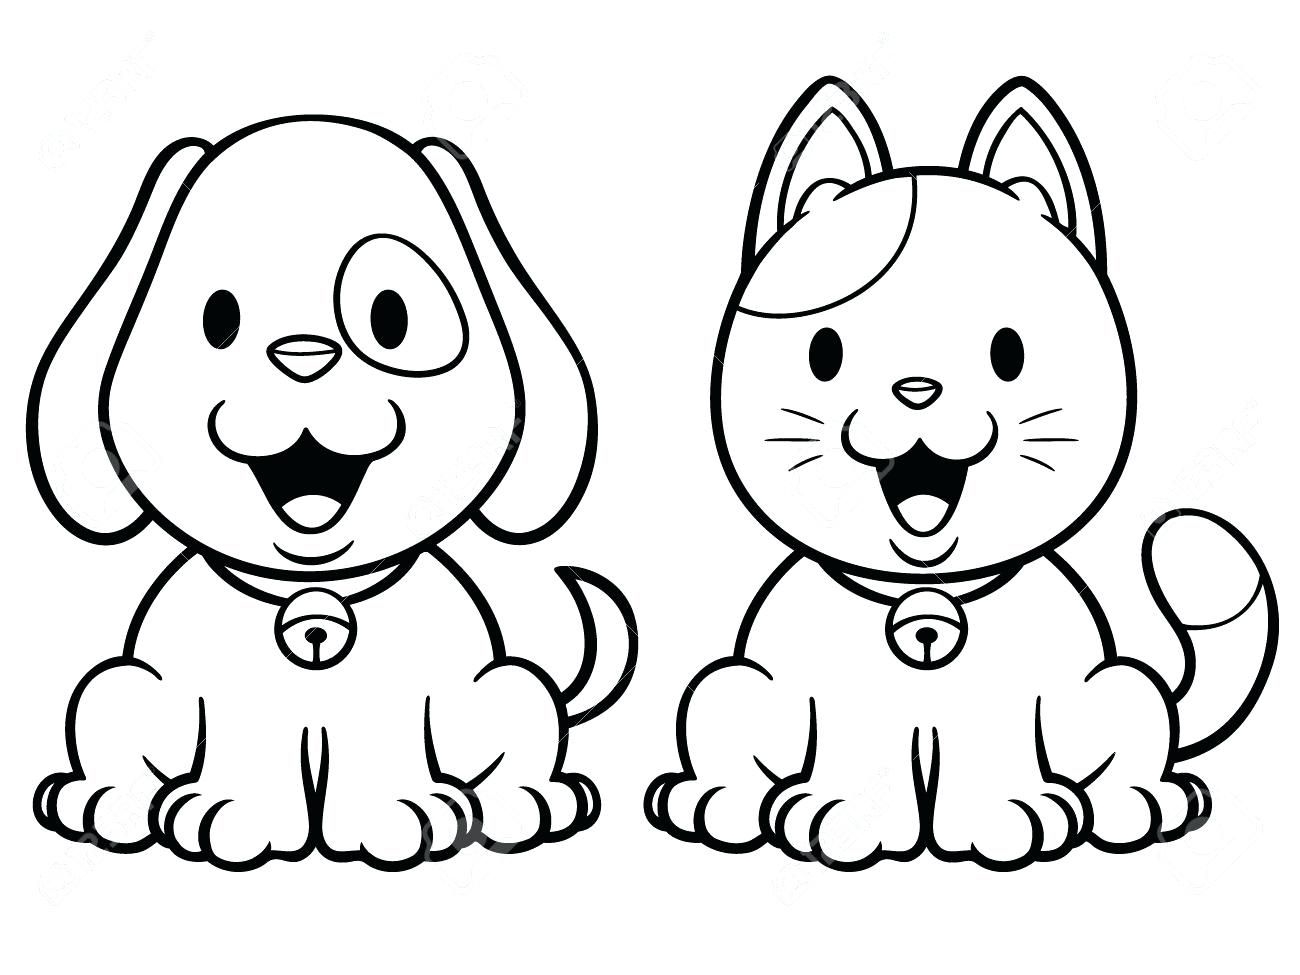 Funny cat and dog coloring pages for kids